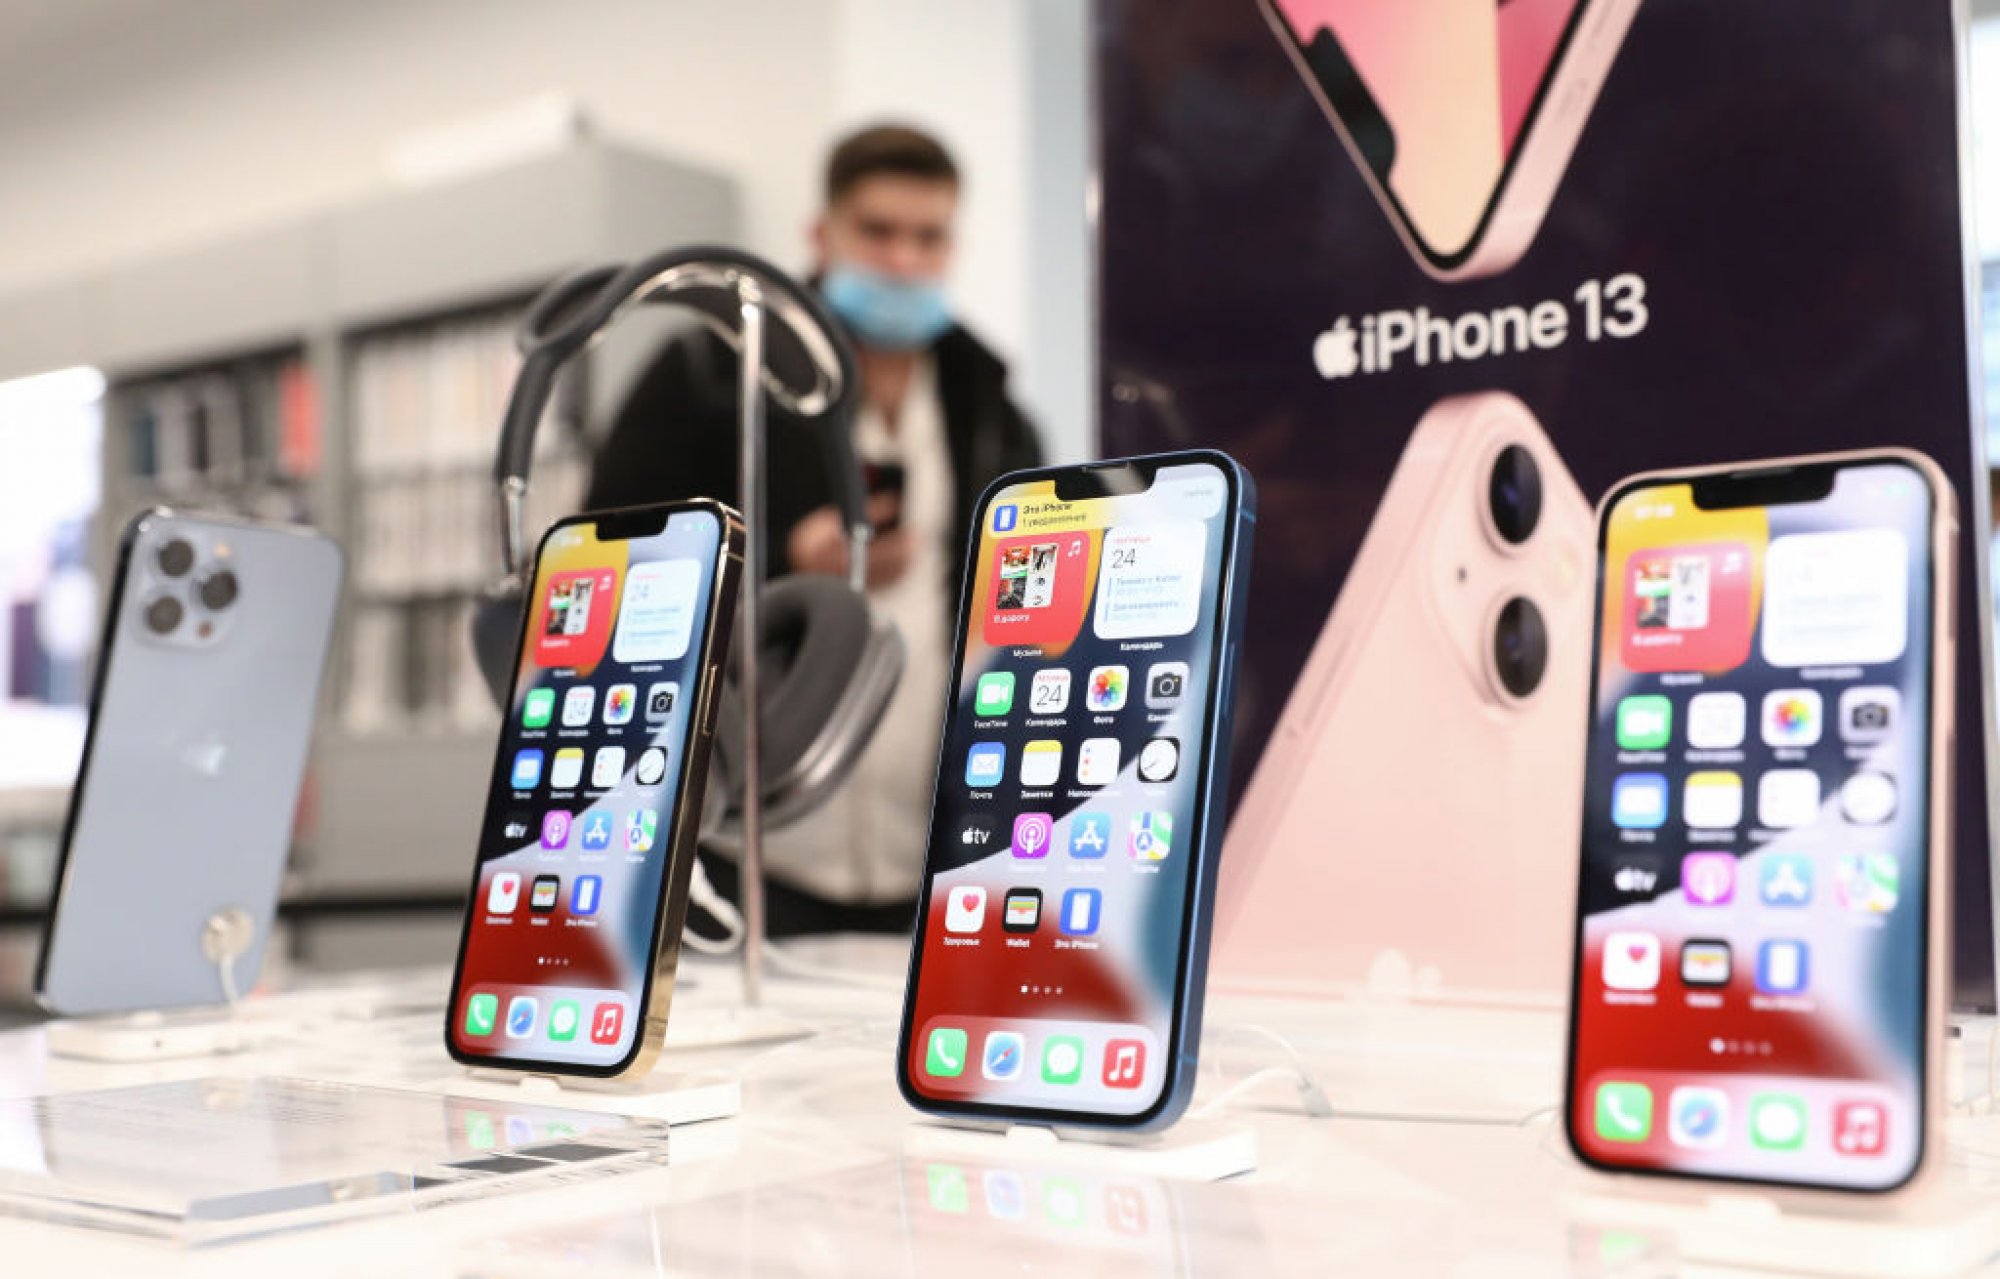 IPhone sales in Russia may break all records by the end of the year